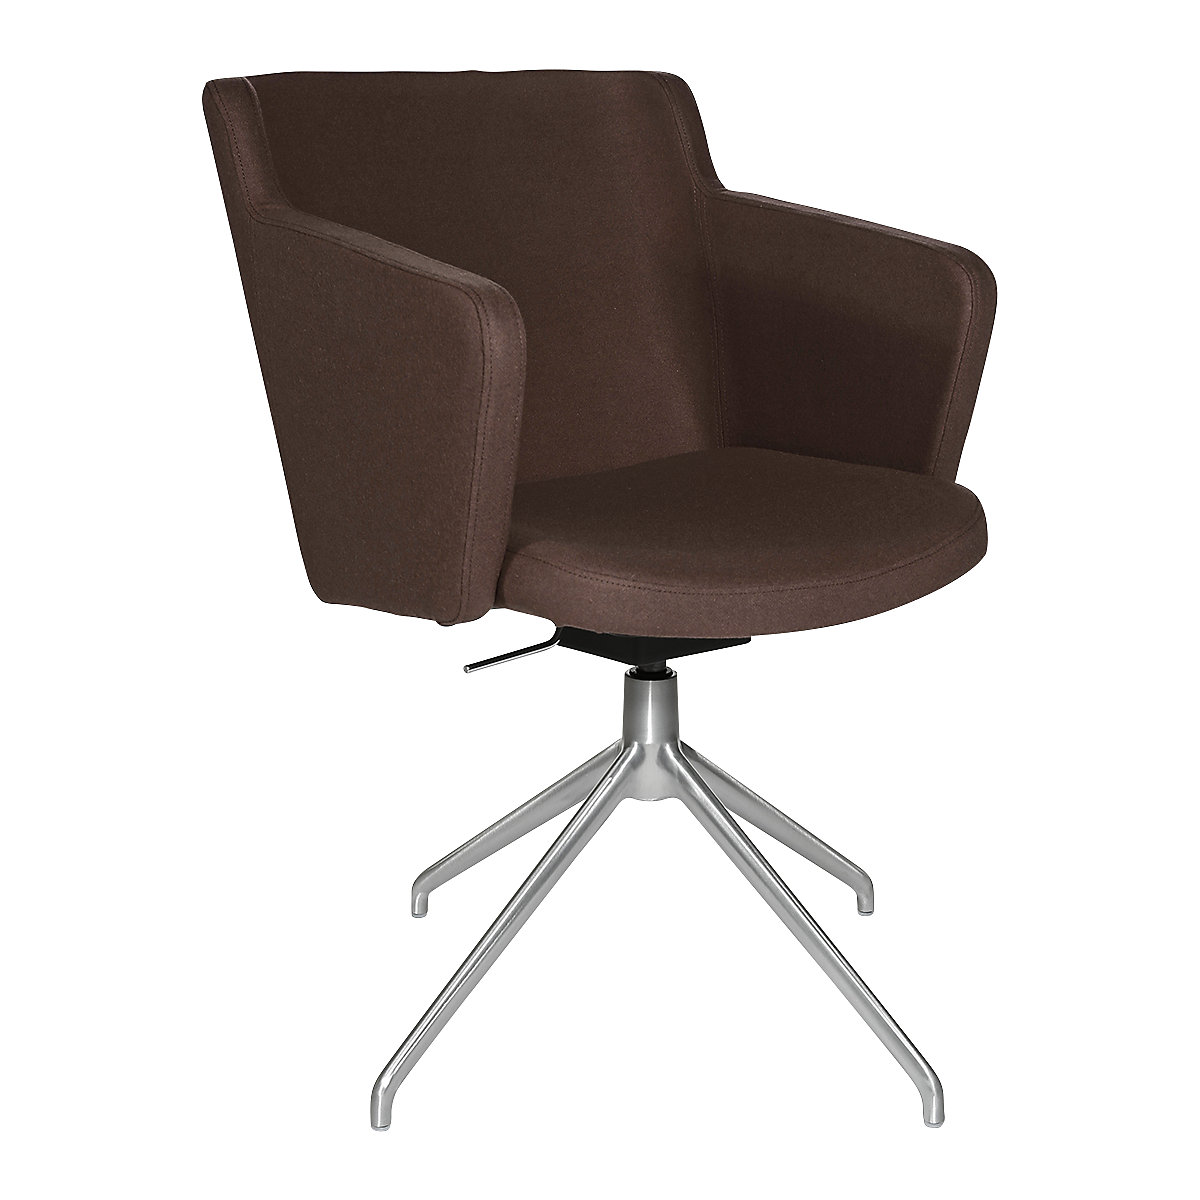 SFH visitors’ chair – Topstar, 3D seat joint and aluminium five star base, brown-15